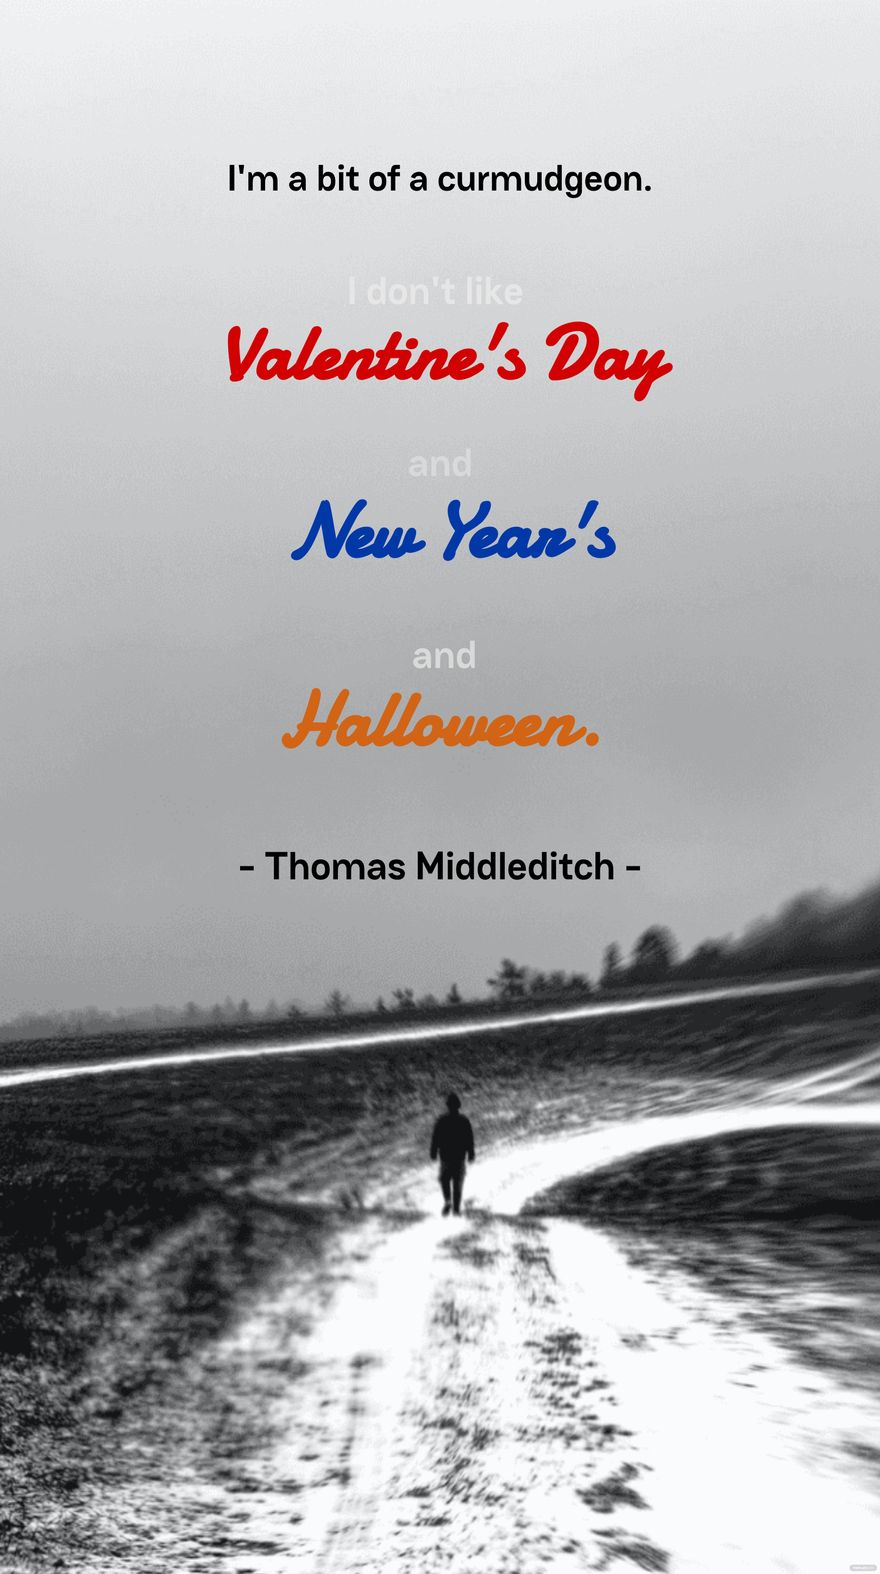 Free Thomas Middleditch - I'm a bit of a curmudgeon. I don't like Valentine's Day and New Year's and Halloween. in JPG